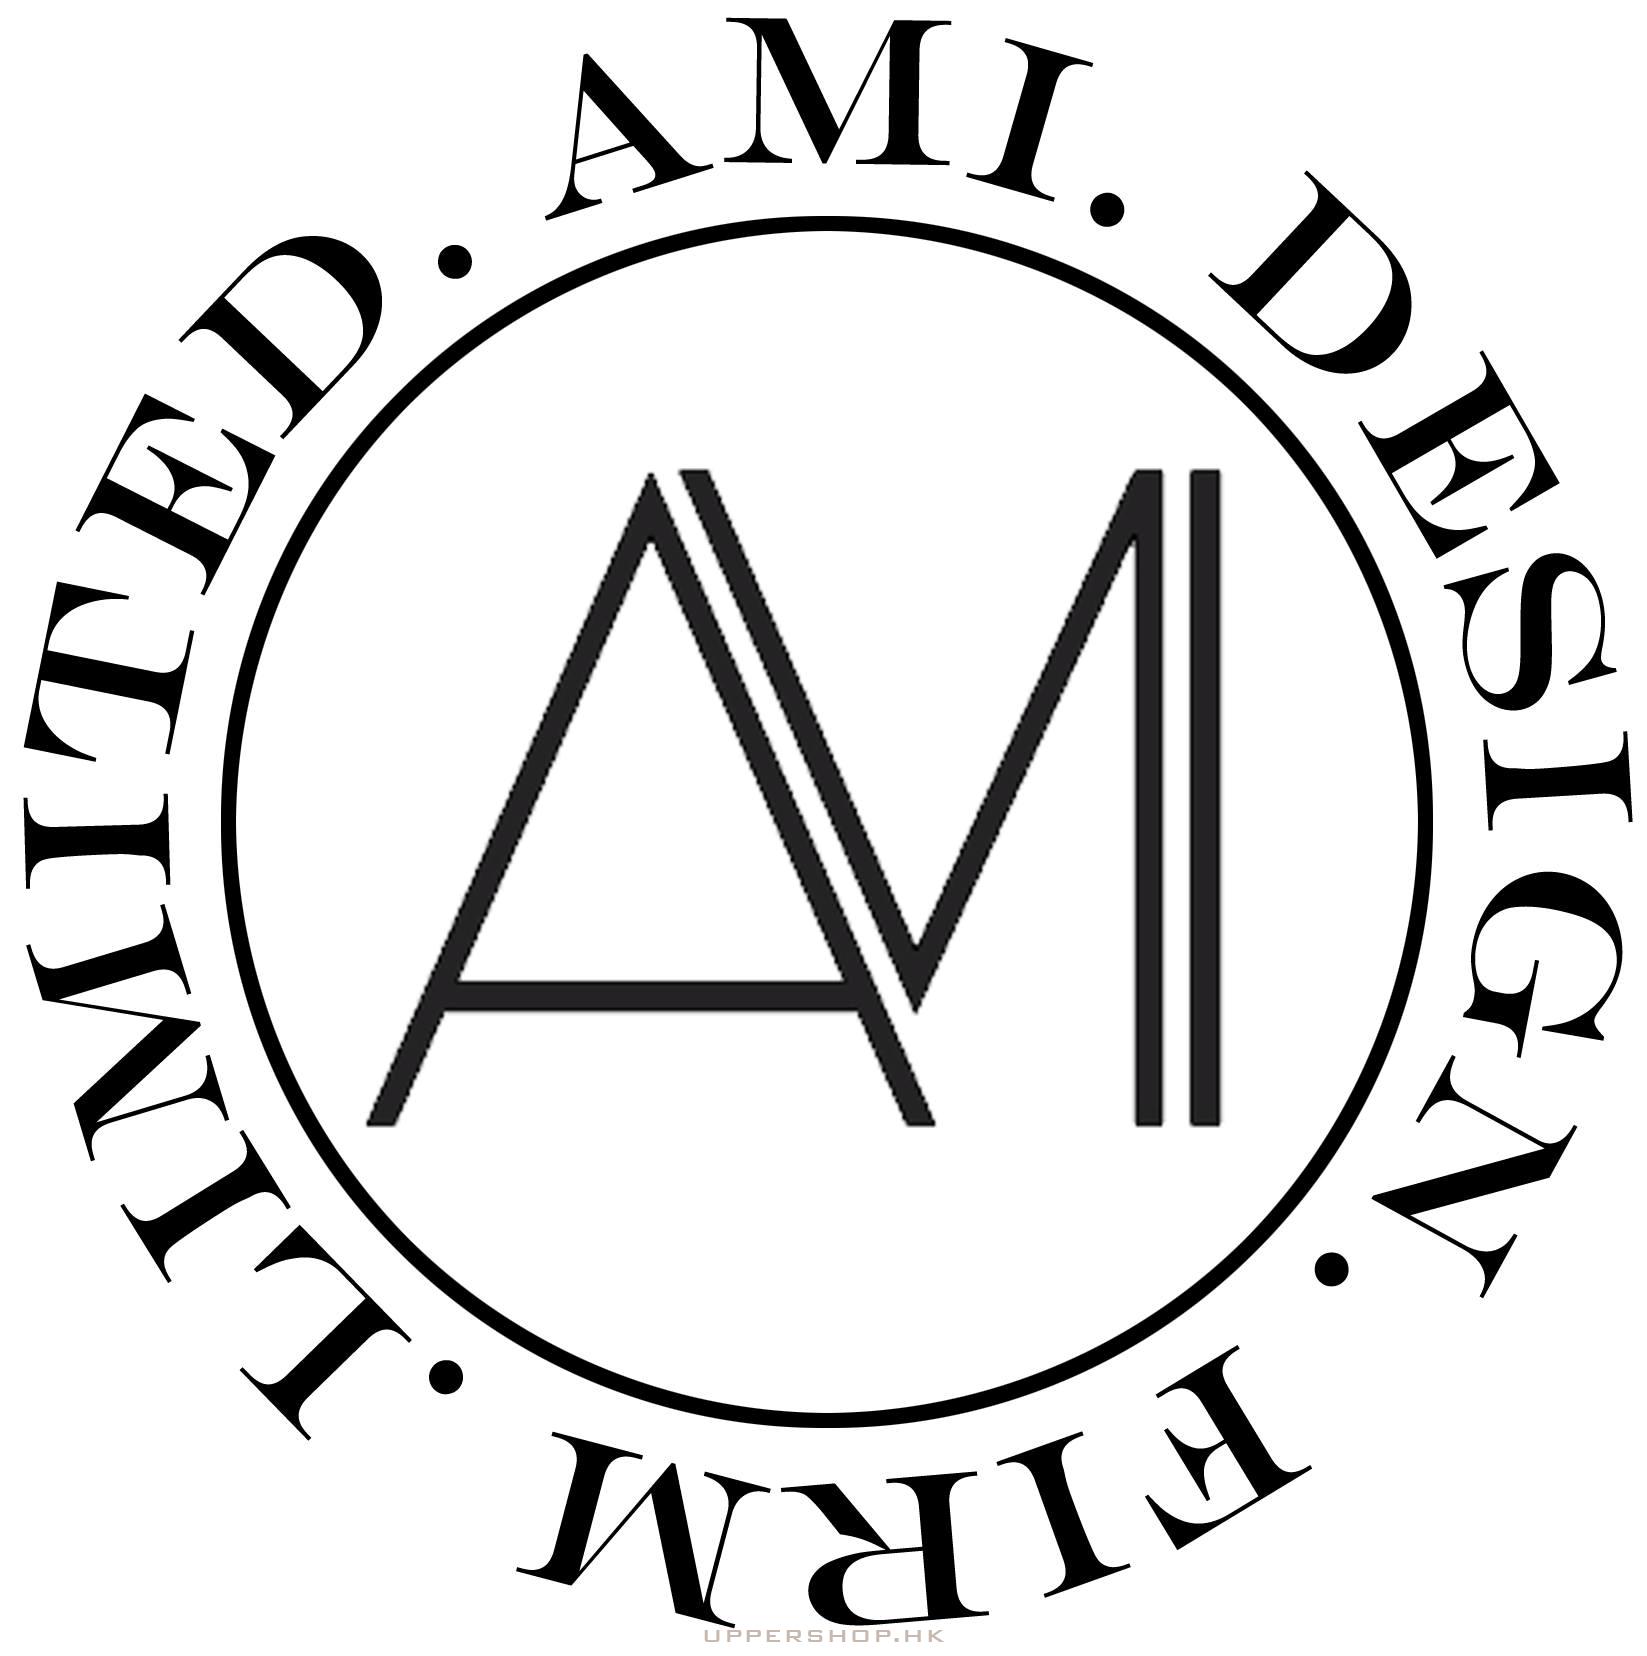 AMI Design Firm Limited